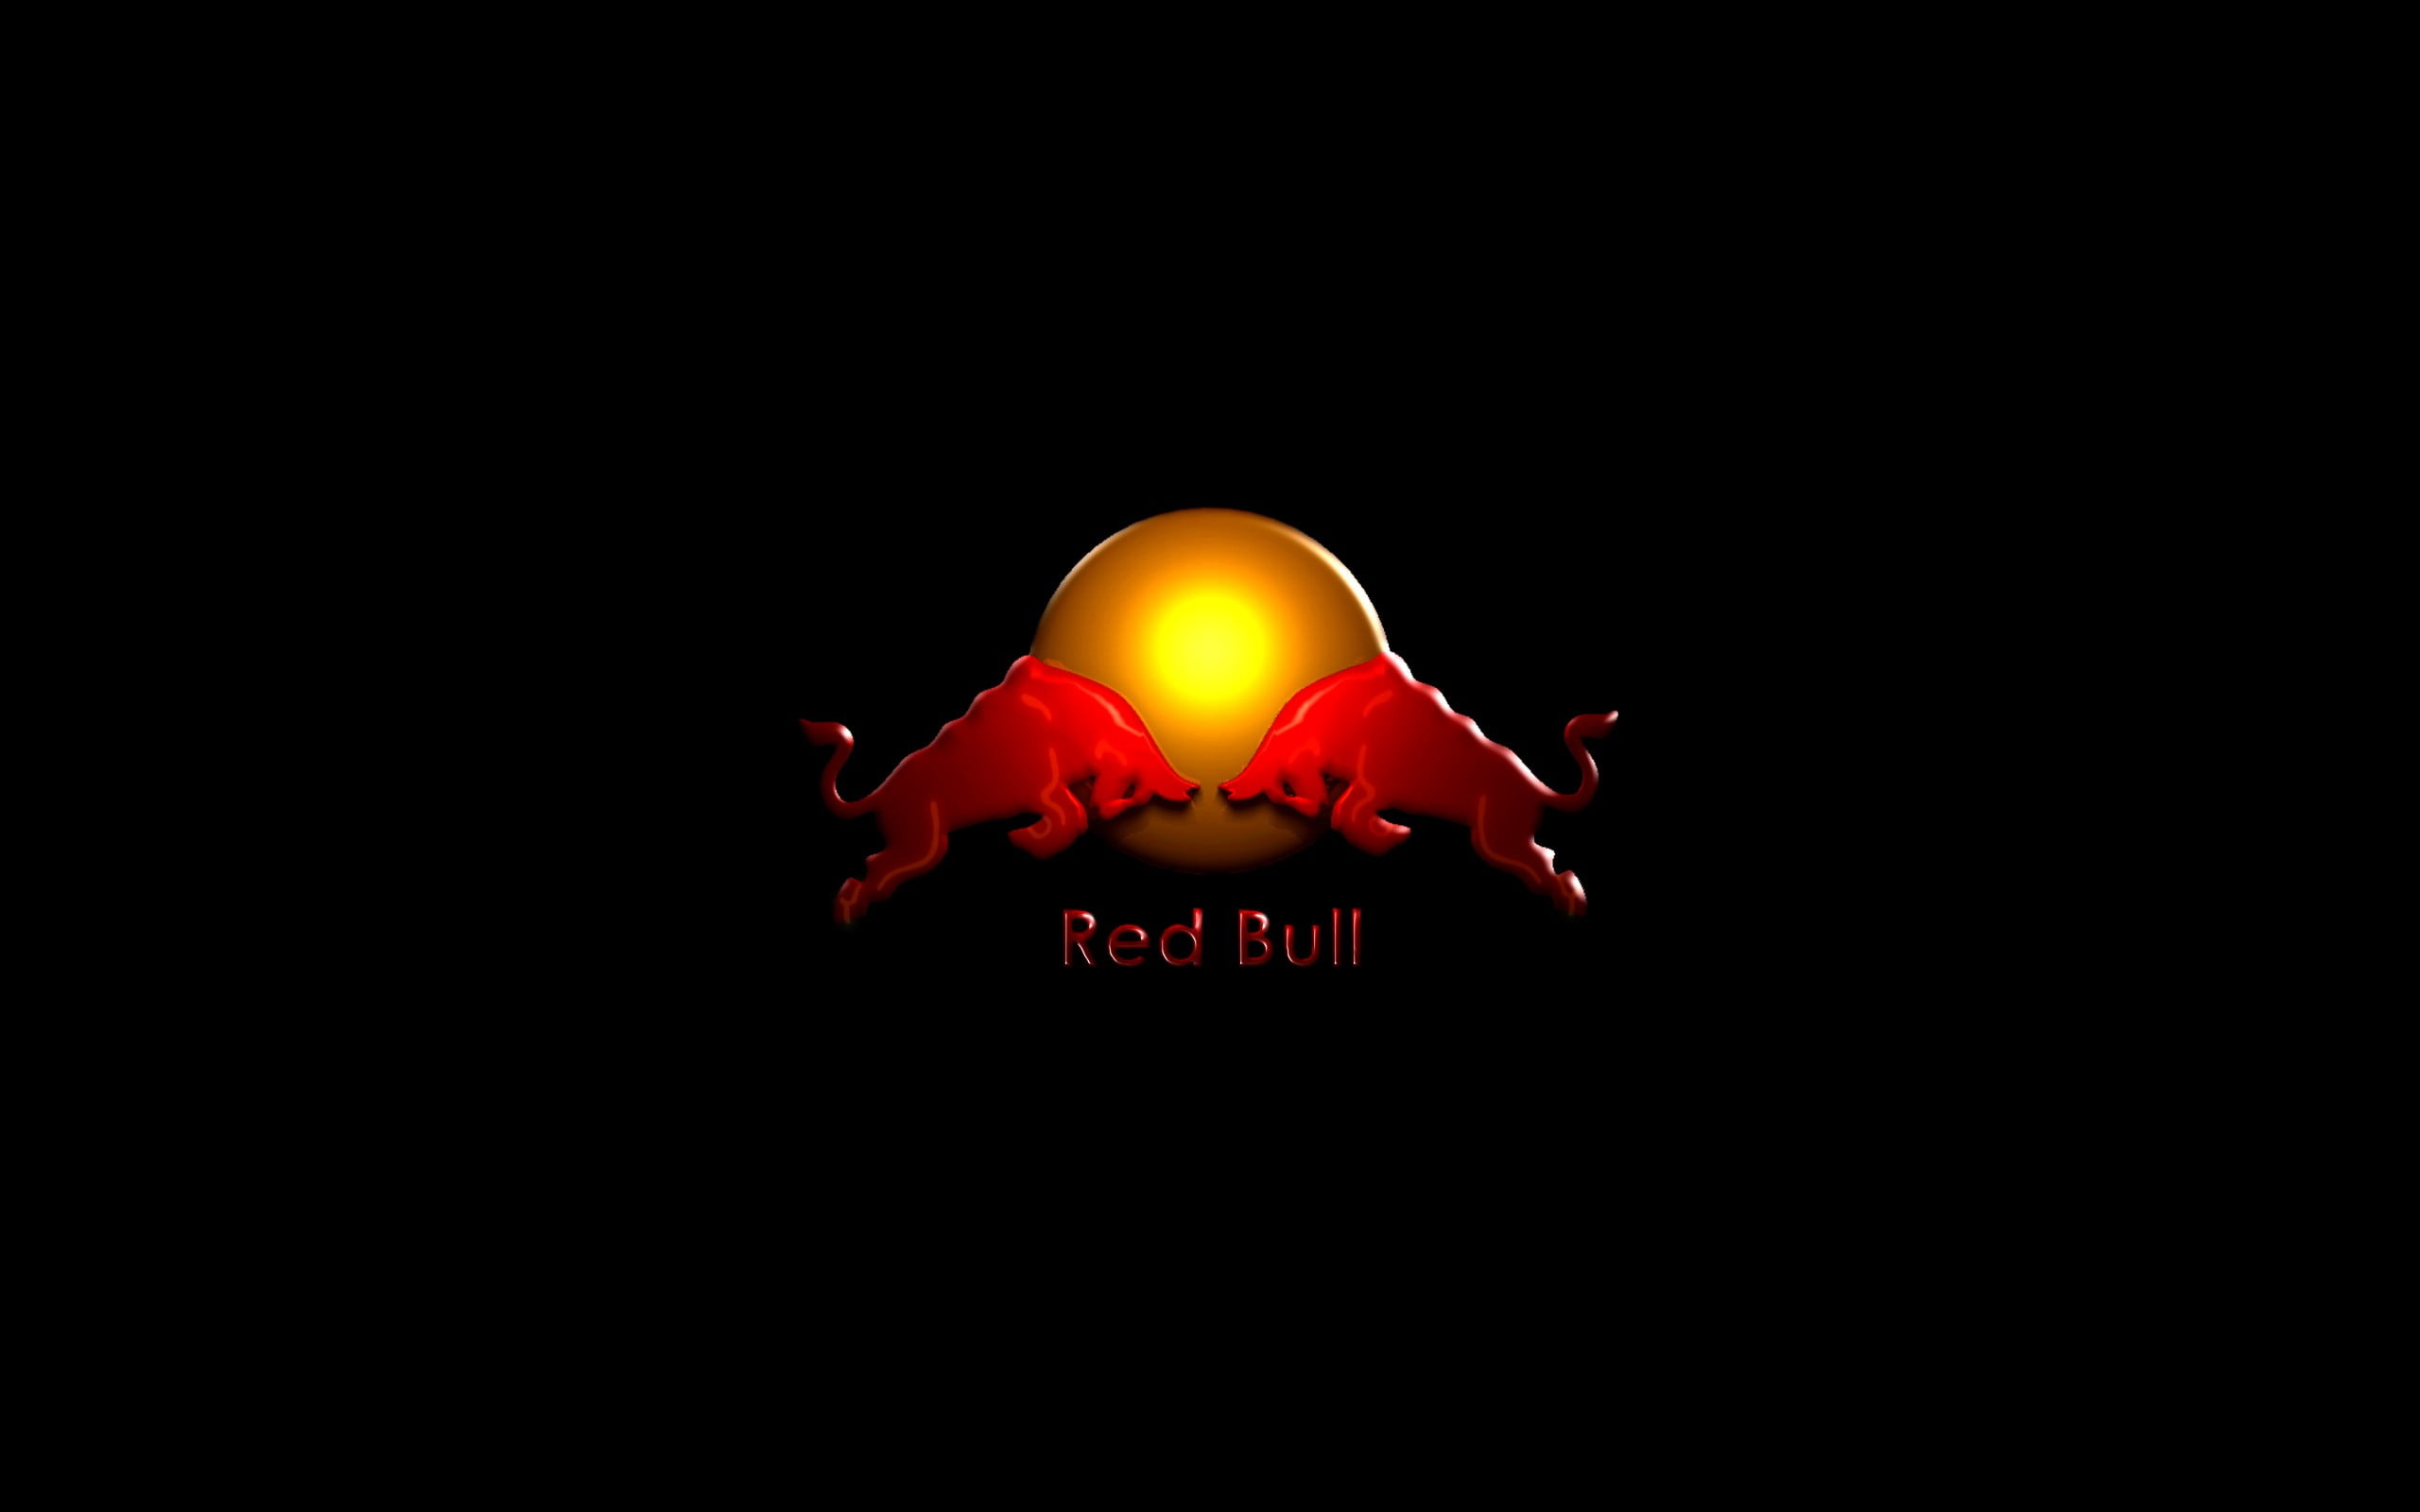 Red Bull Logo: Energy drinks, Well-known for their energy-promoting qualities. 2560x1600 HD Wallpaper.